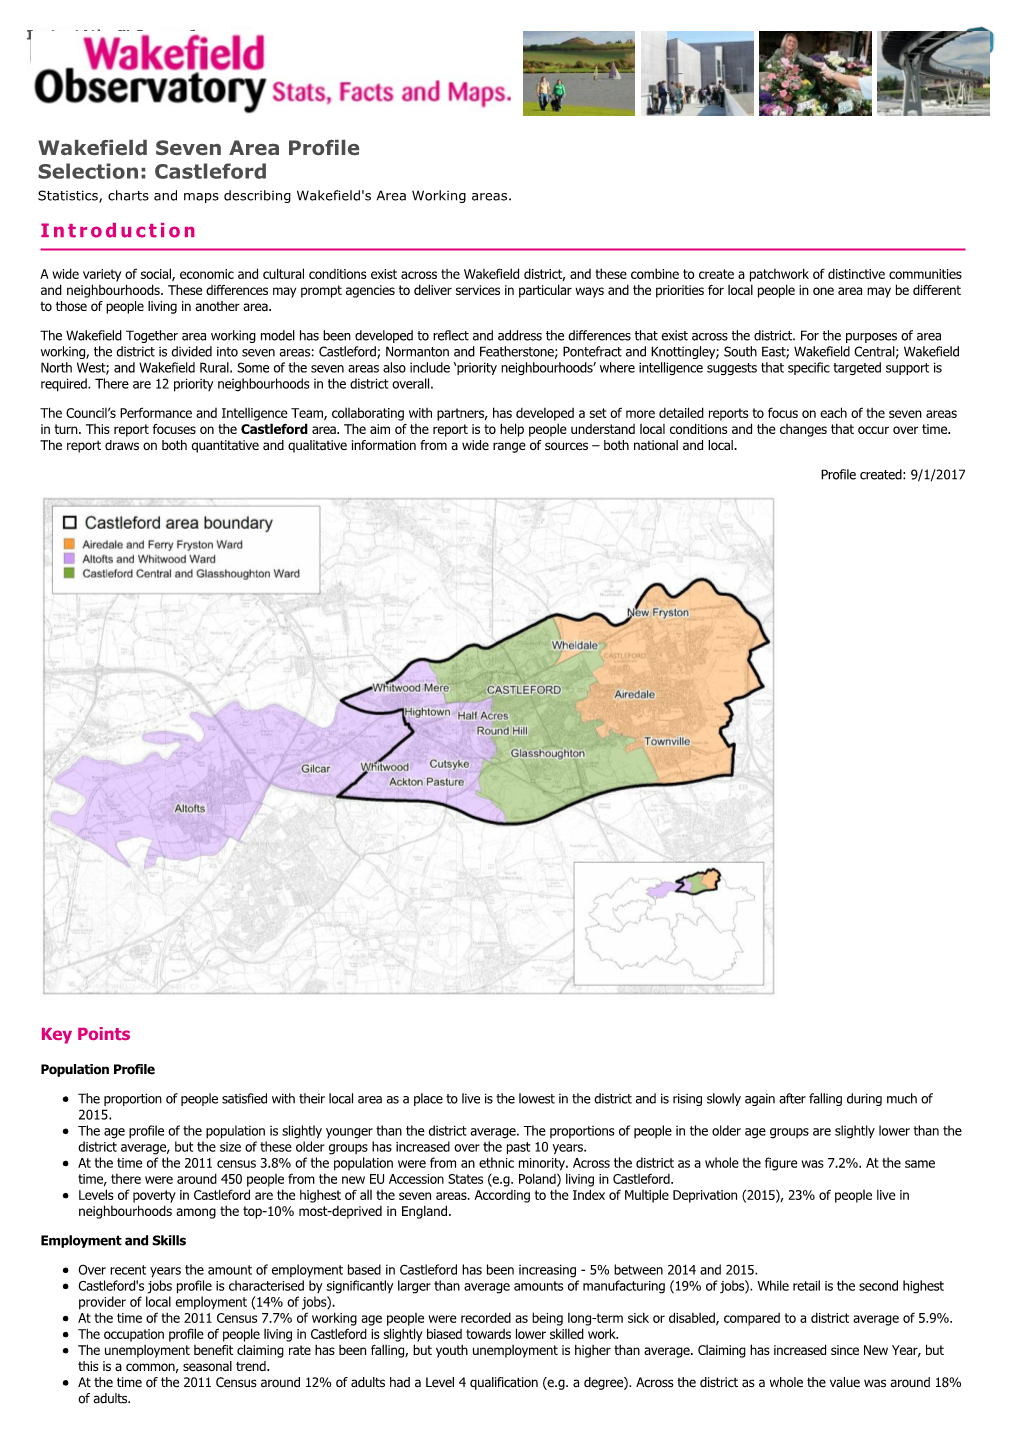 Castleford Statistics, Charts and Maps Describing Wakefield's Area Working Areas